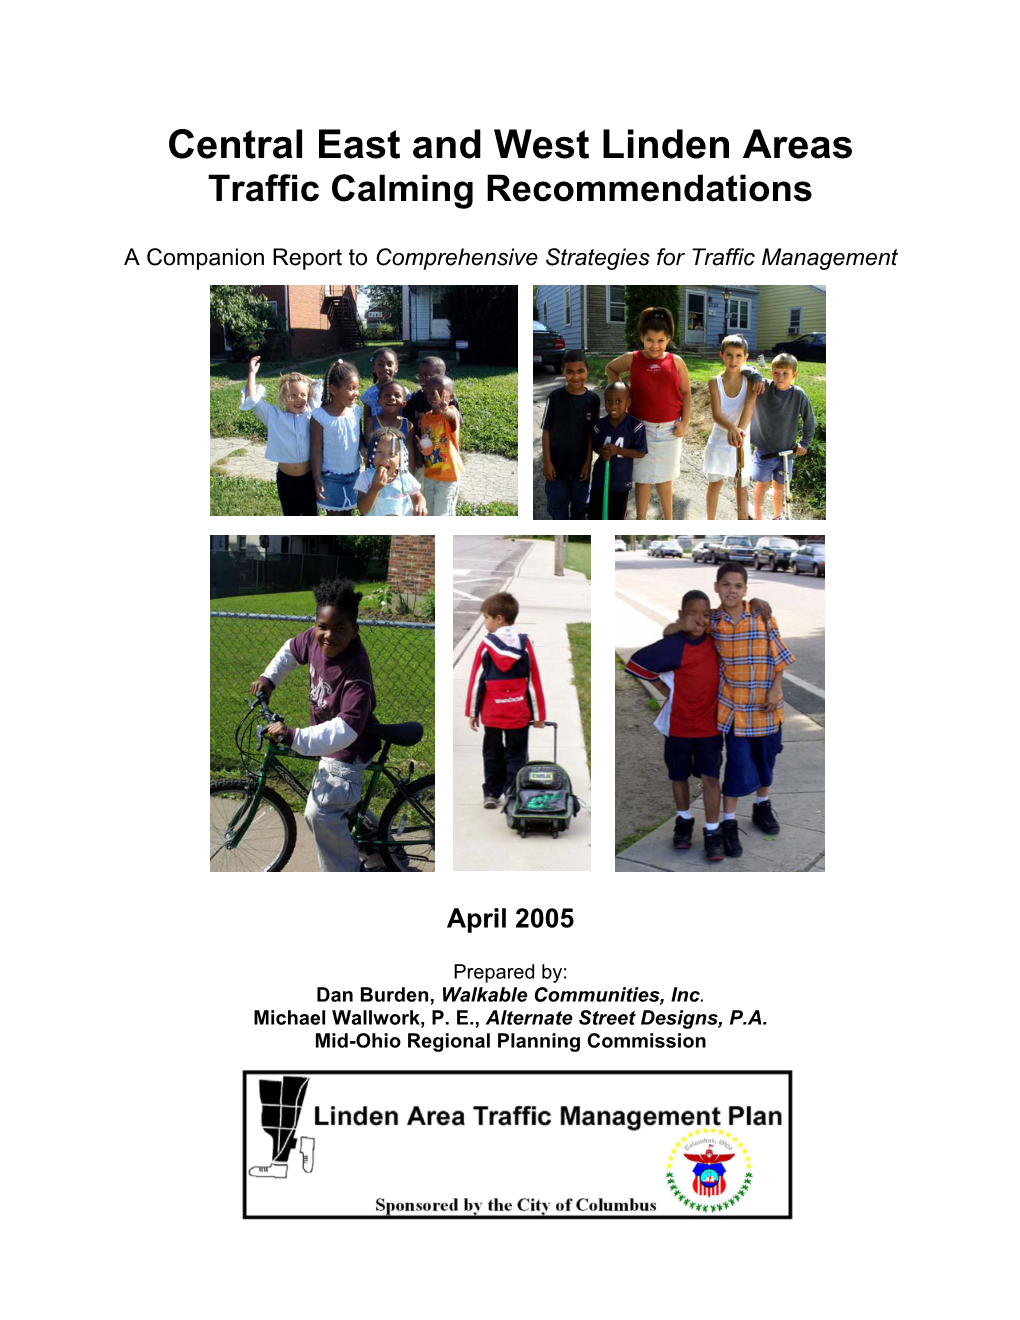 Central East and West Linden Areas Traffic Calming Recommendations